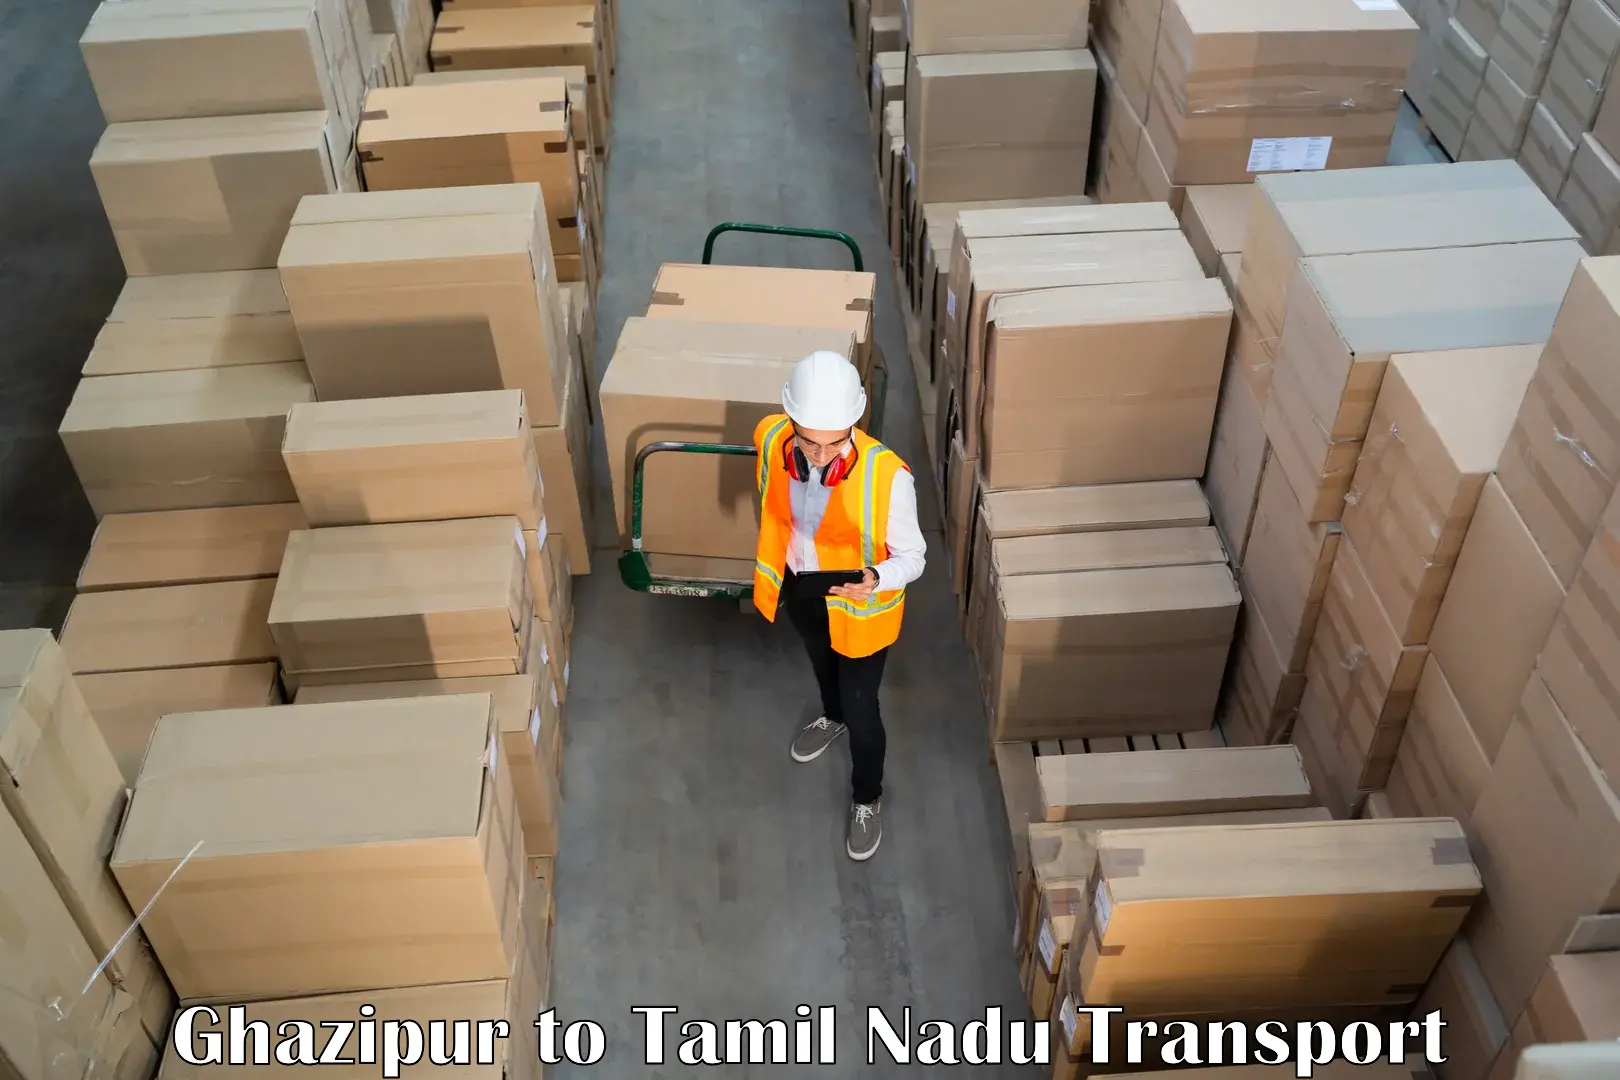 Shipping partner Ghazipur to Kuttanur